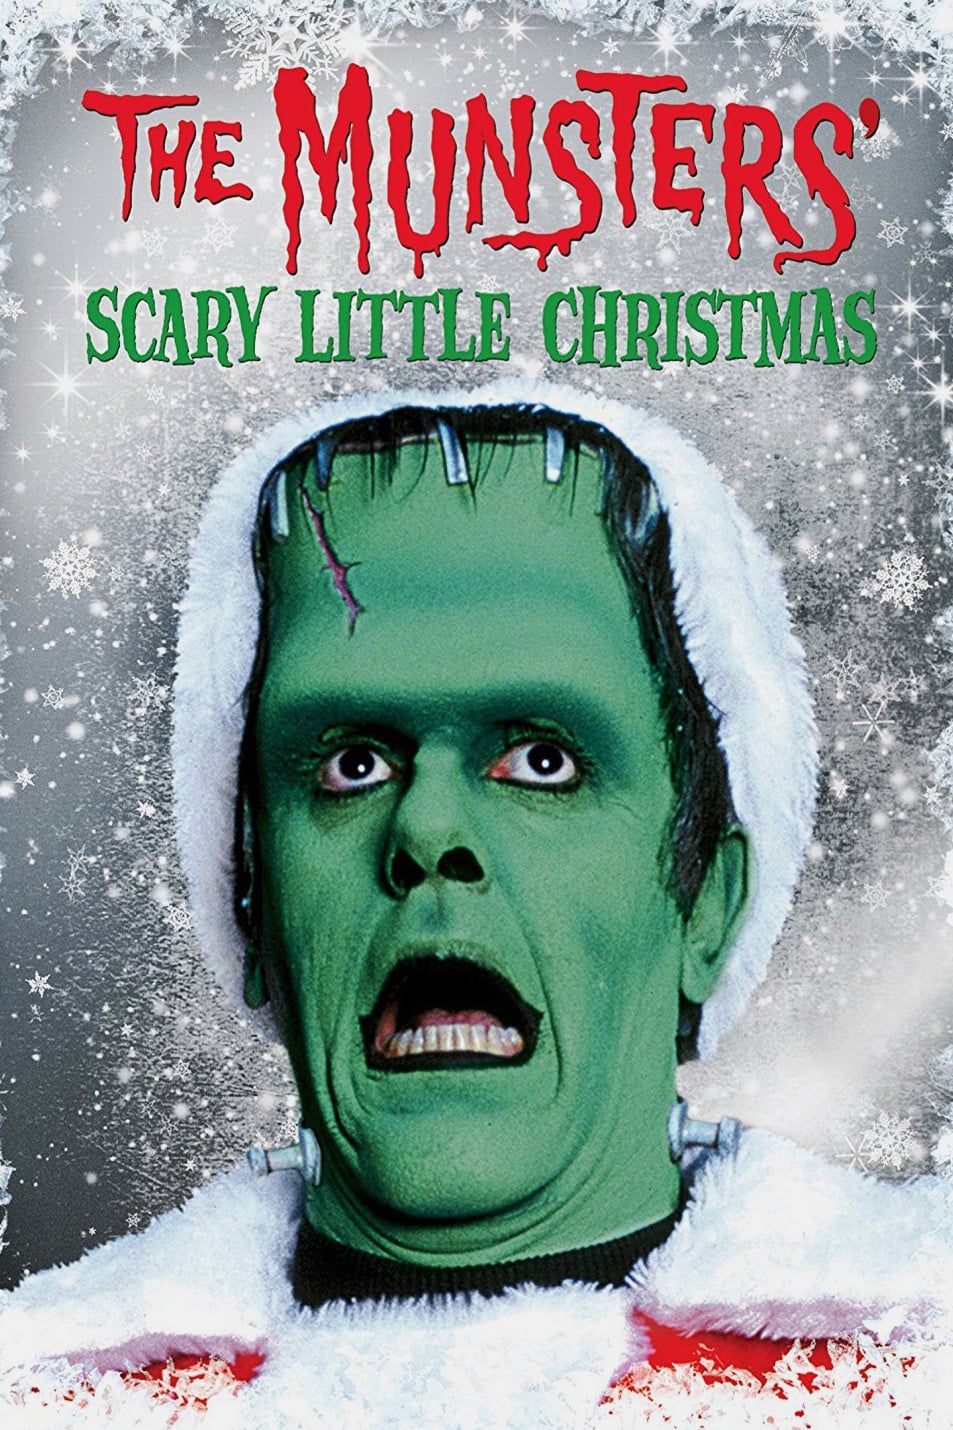 Poster for the movie "The Munsters' Scary Little Christmas"